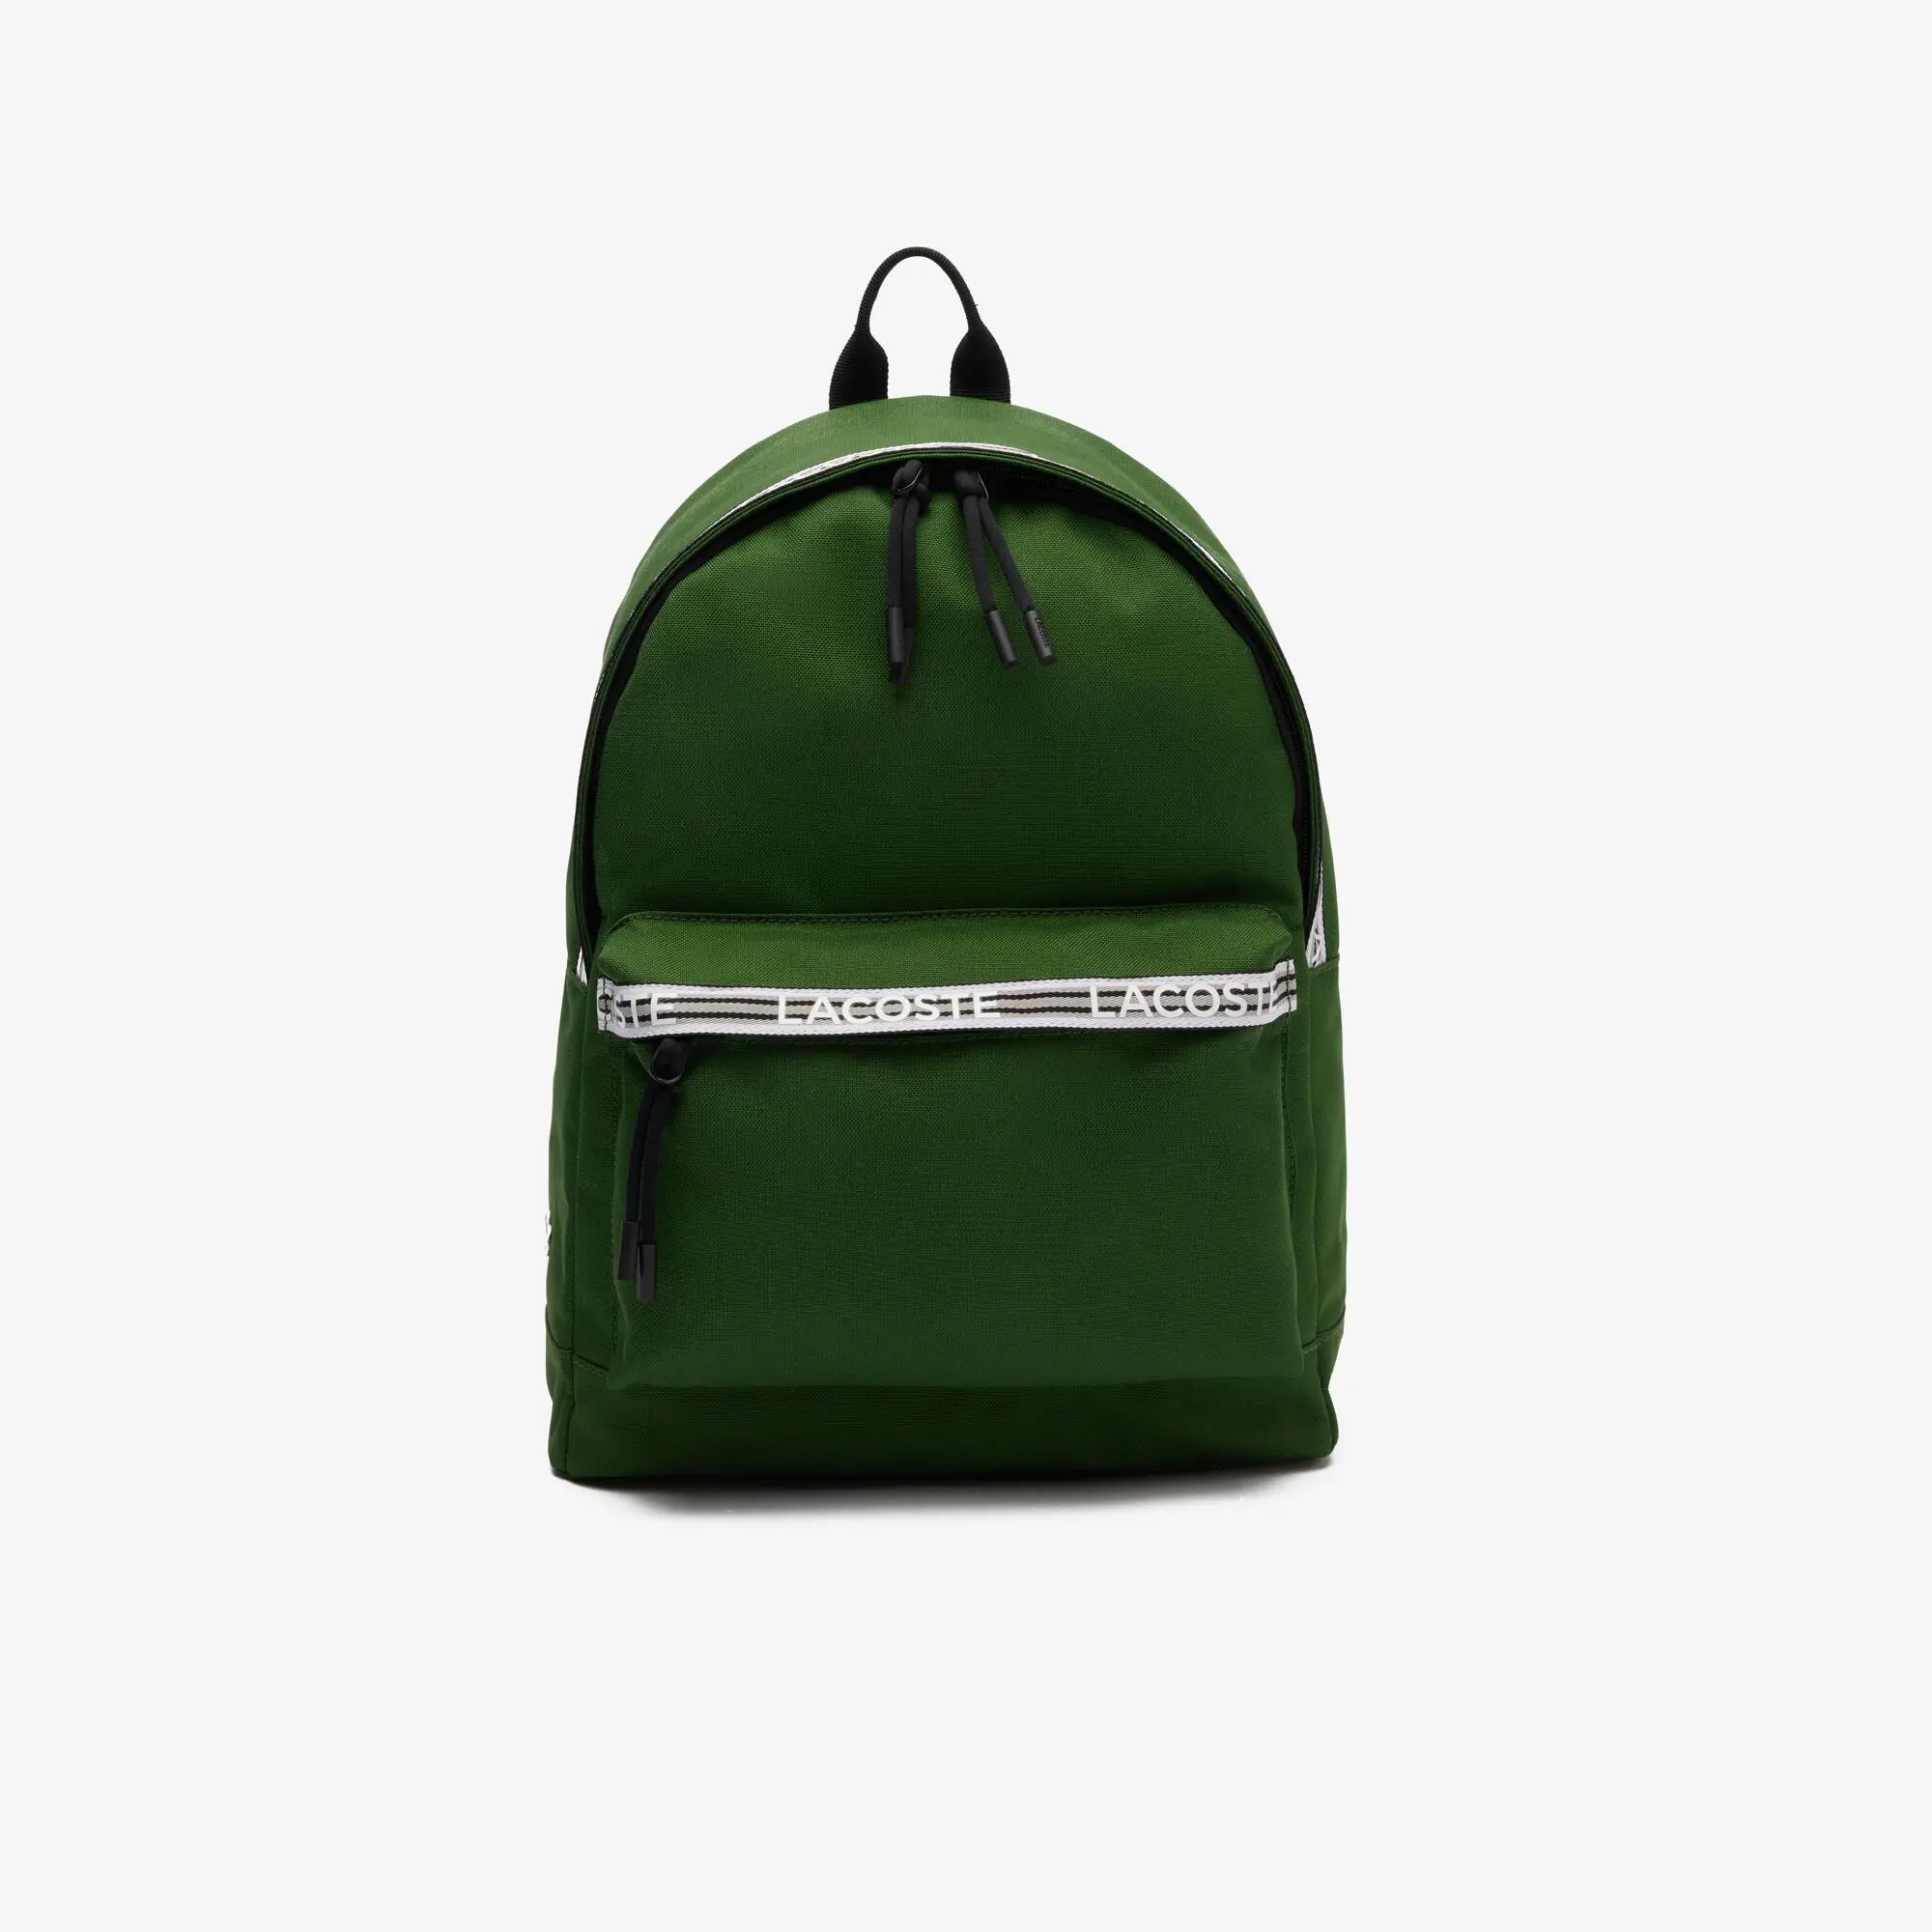 Lacoste Men’s Lacoste Neocroc Backpack with Zipped Logo Straps. 1